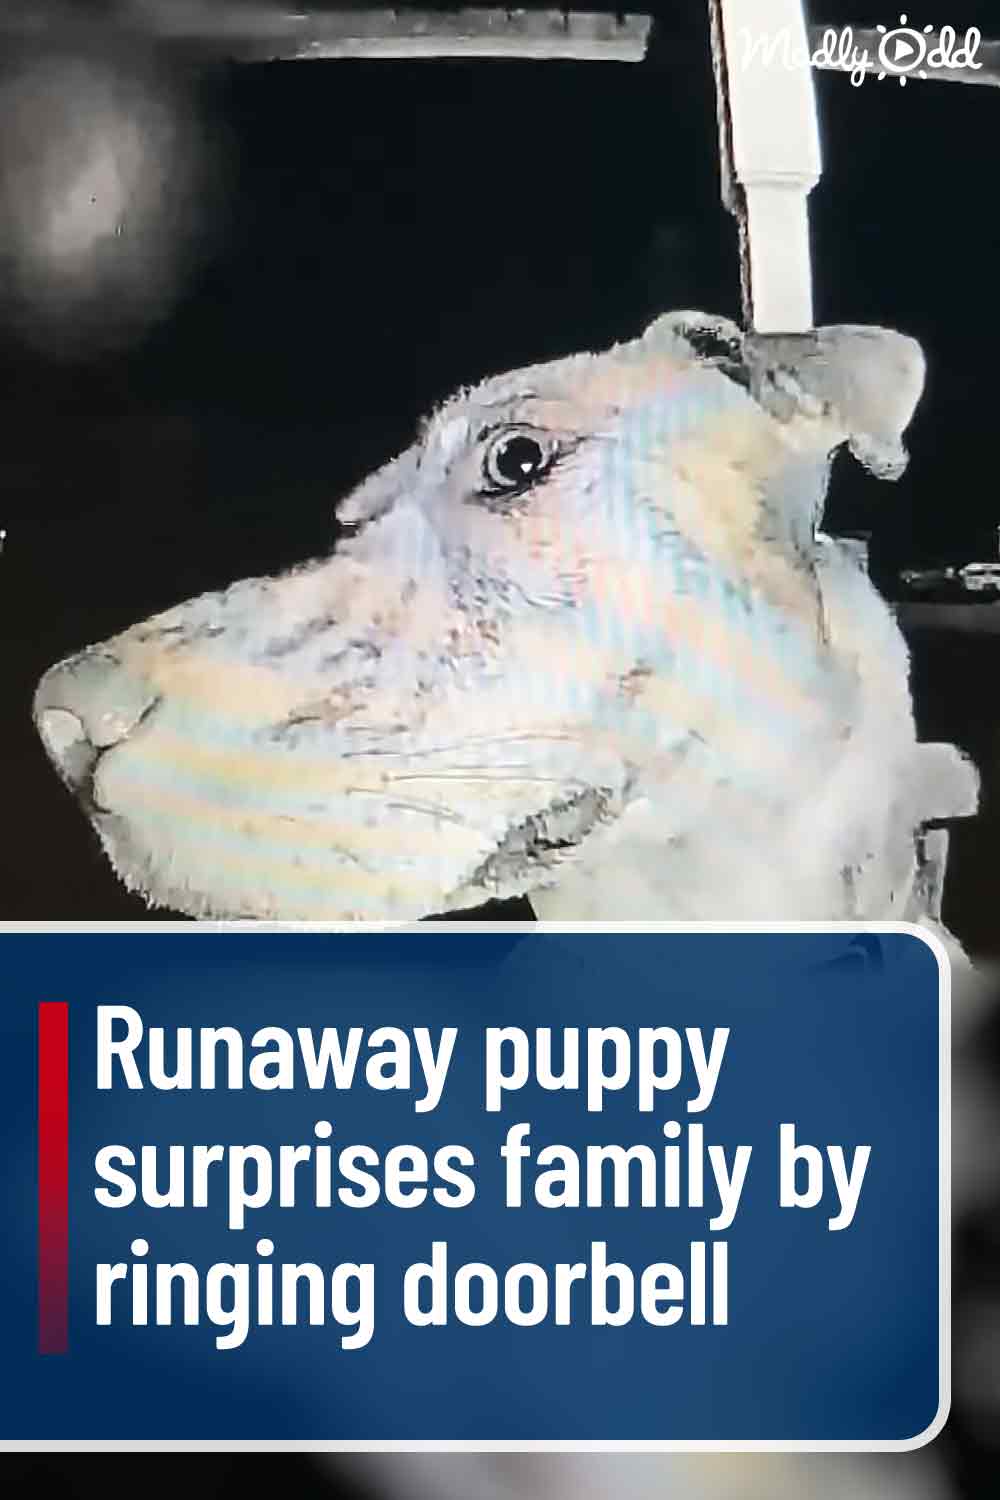 Runaway puppy surprises family by ringing doorbell